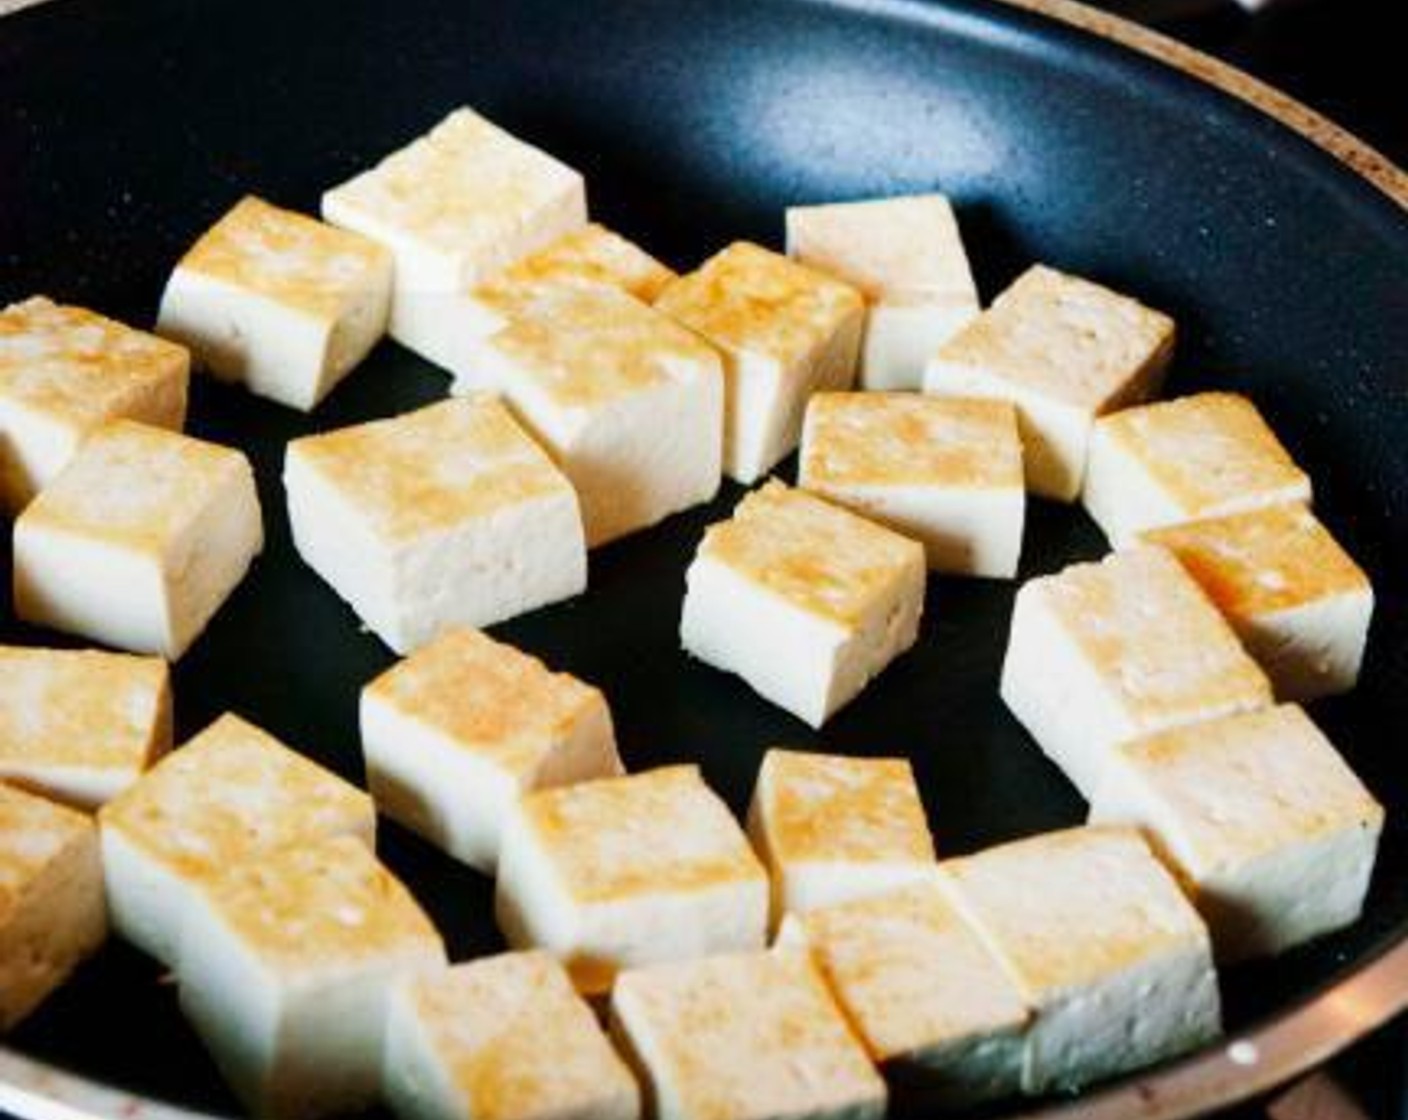 step 3 In a skillet heat up Vegetable Oil (1 tsp) and Sesame Oil (1 tsp). When warm, add the tofu and cook it on all 4 sides, season with salt and Chili Powder (1/2 tsp). Add the Soy Sauce (1 Tbsp) and saute for 1 min.